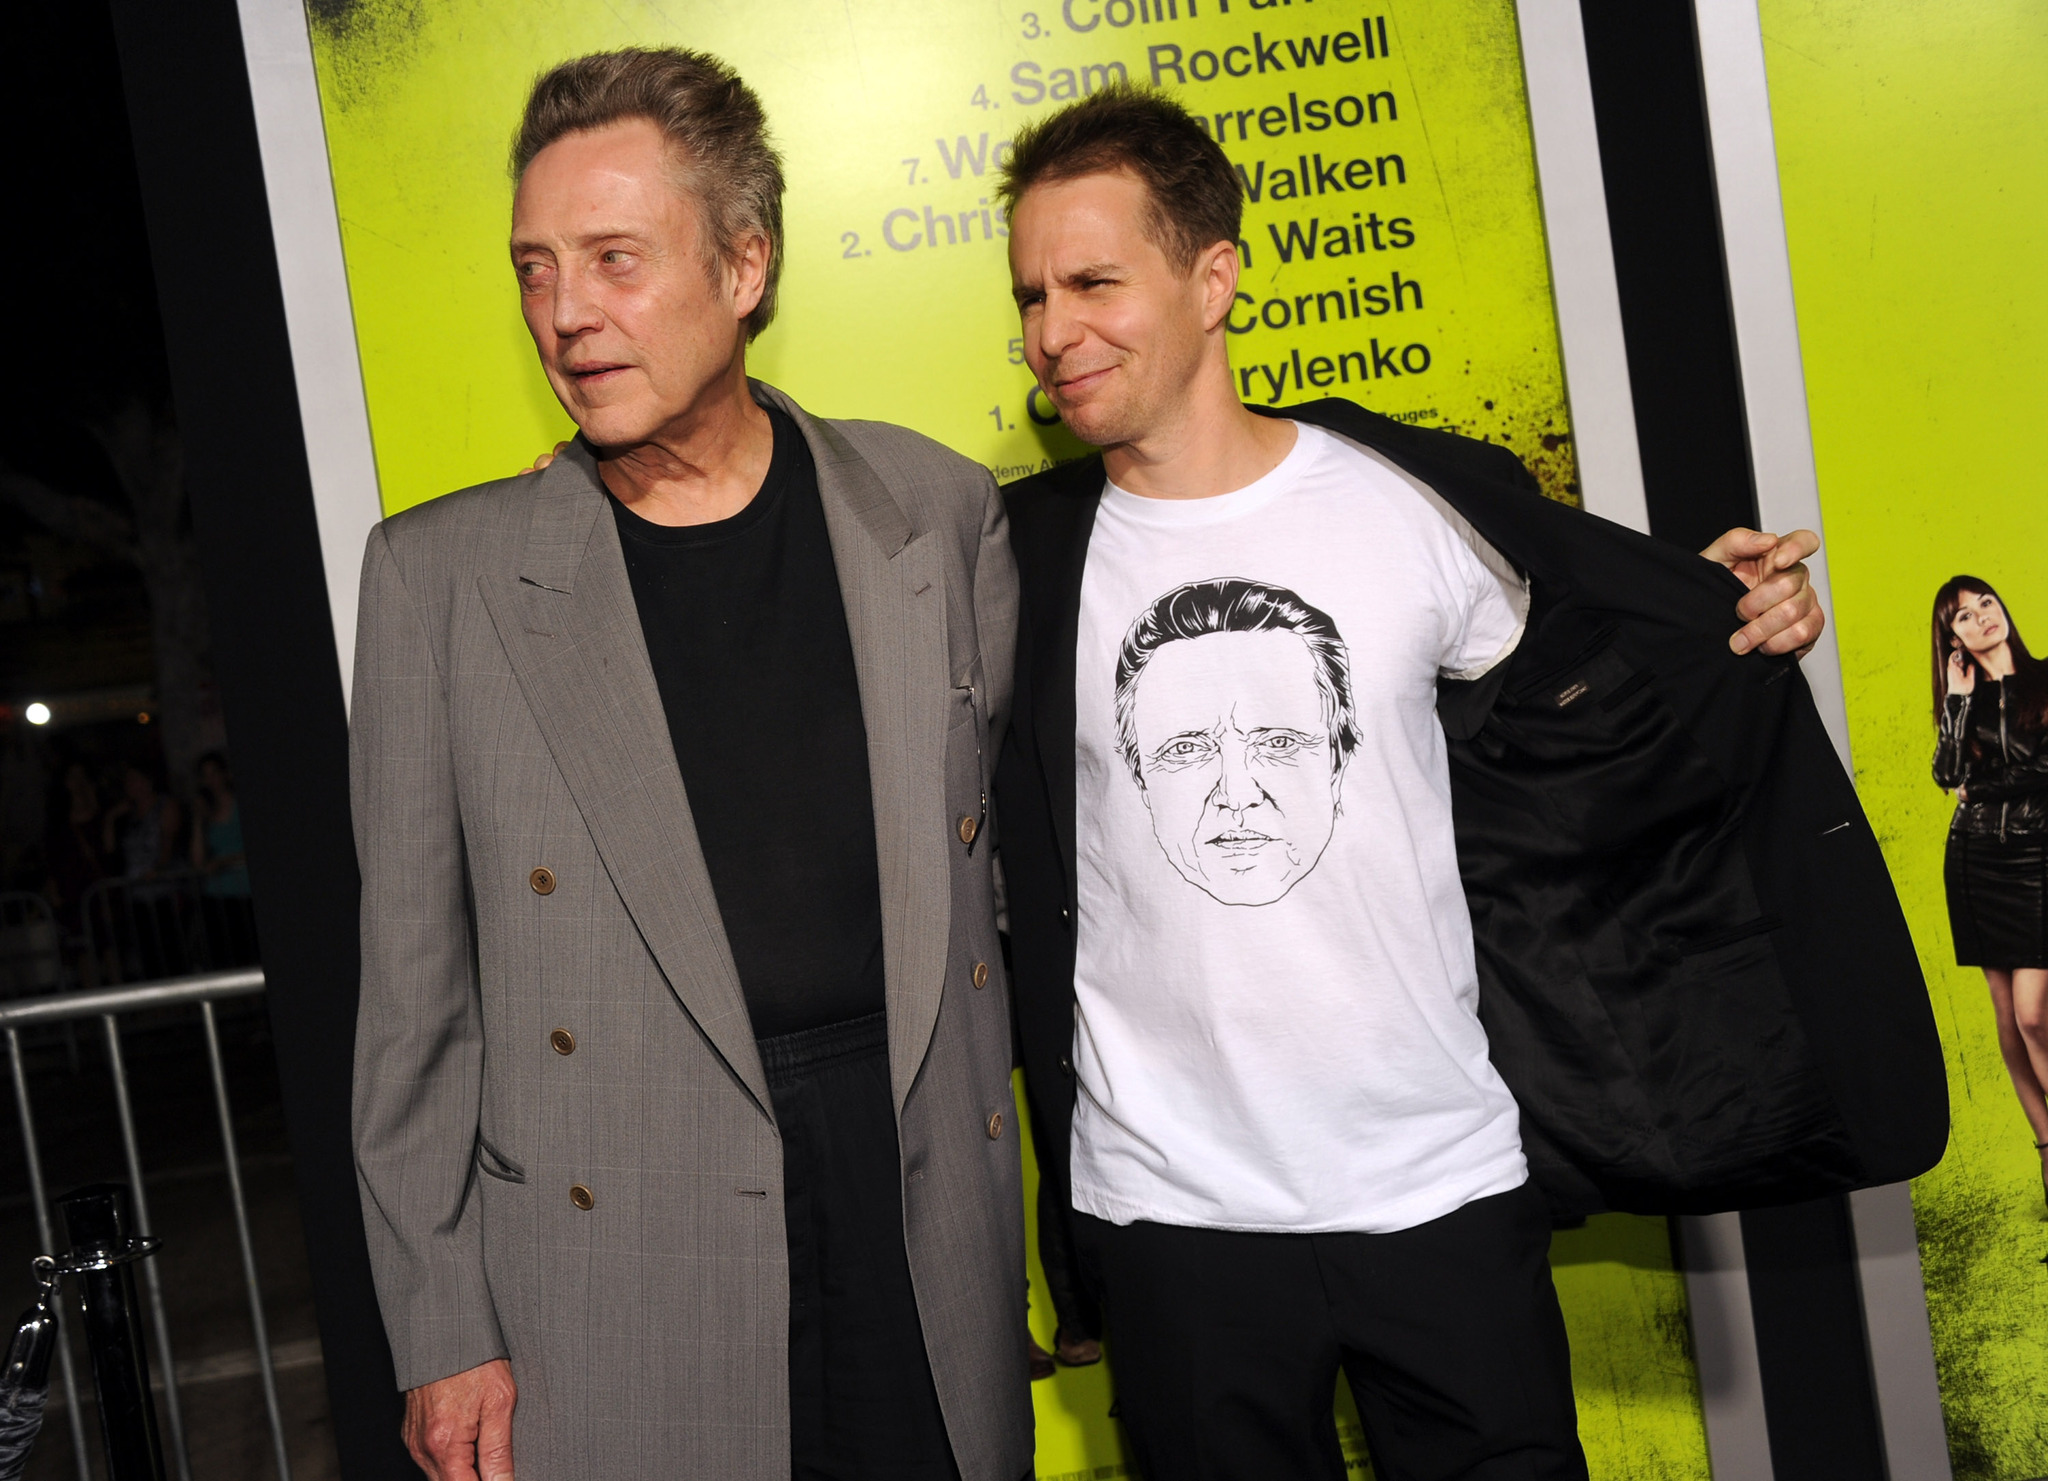 Christopher Walken and Sam Rockwell at event of Septyni psichopatai (2012)